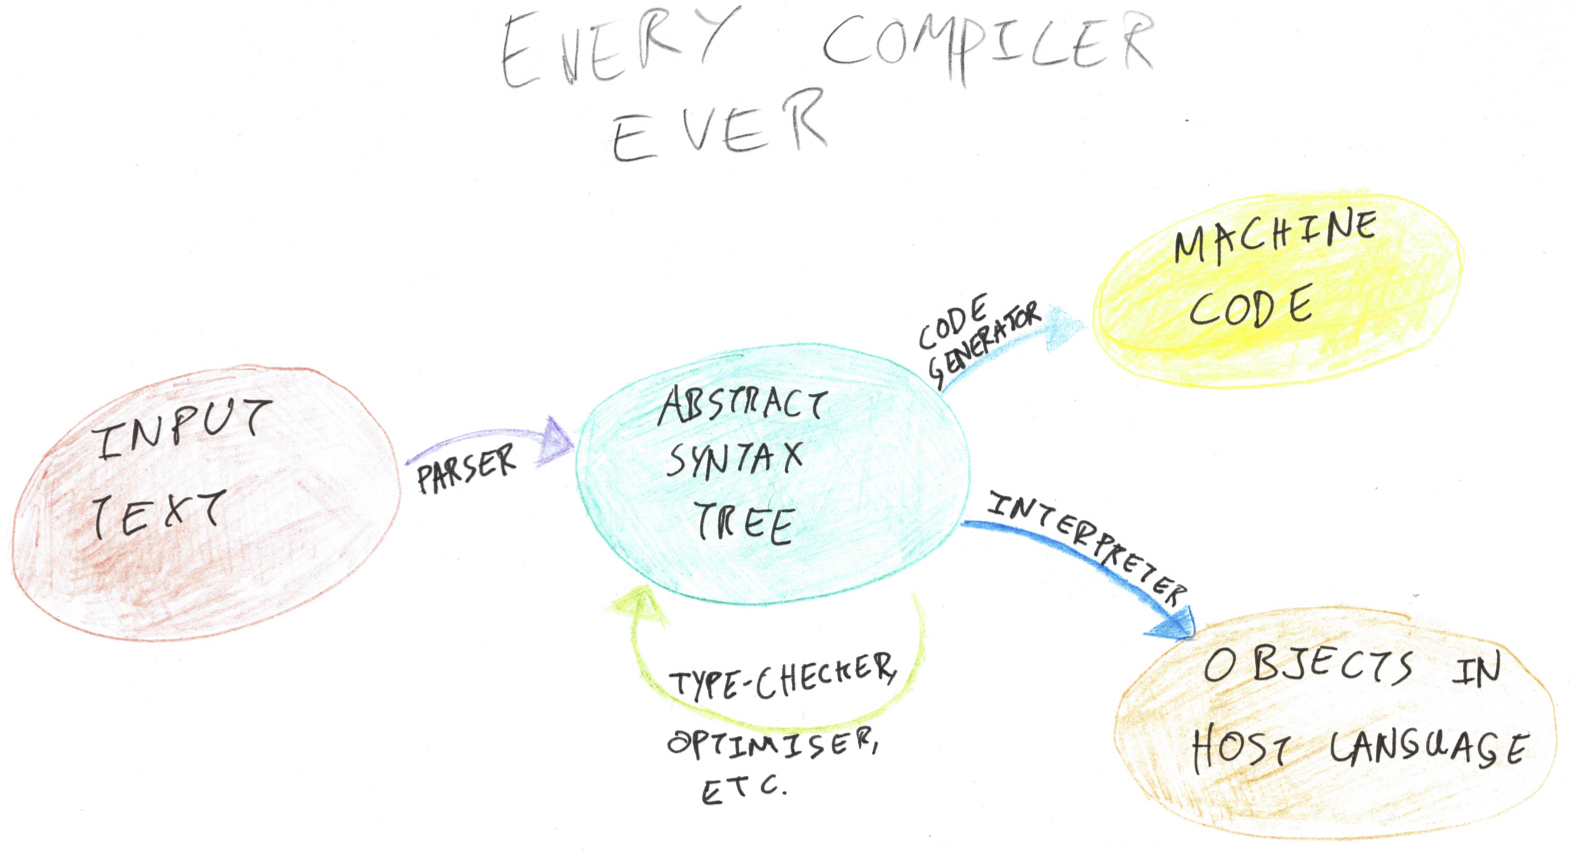 Compiler overview